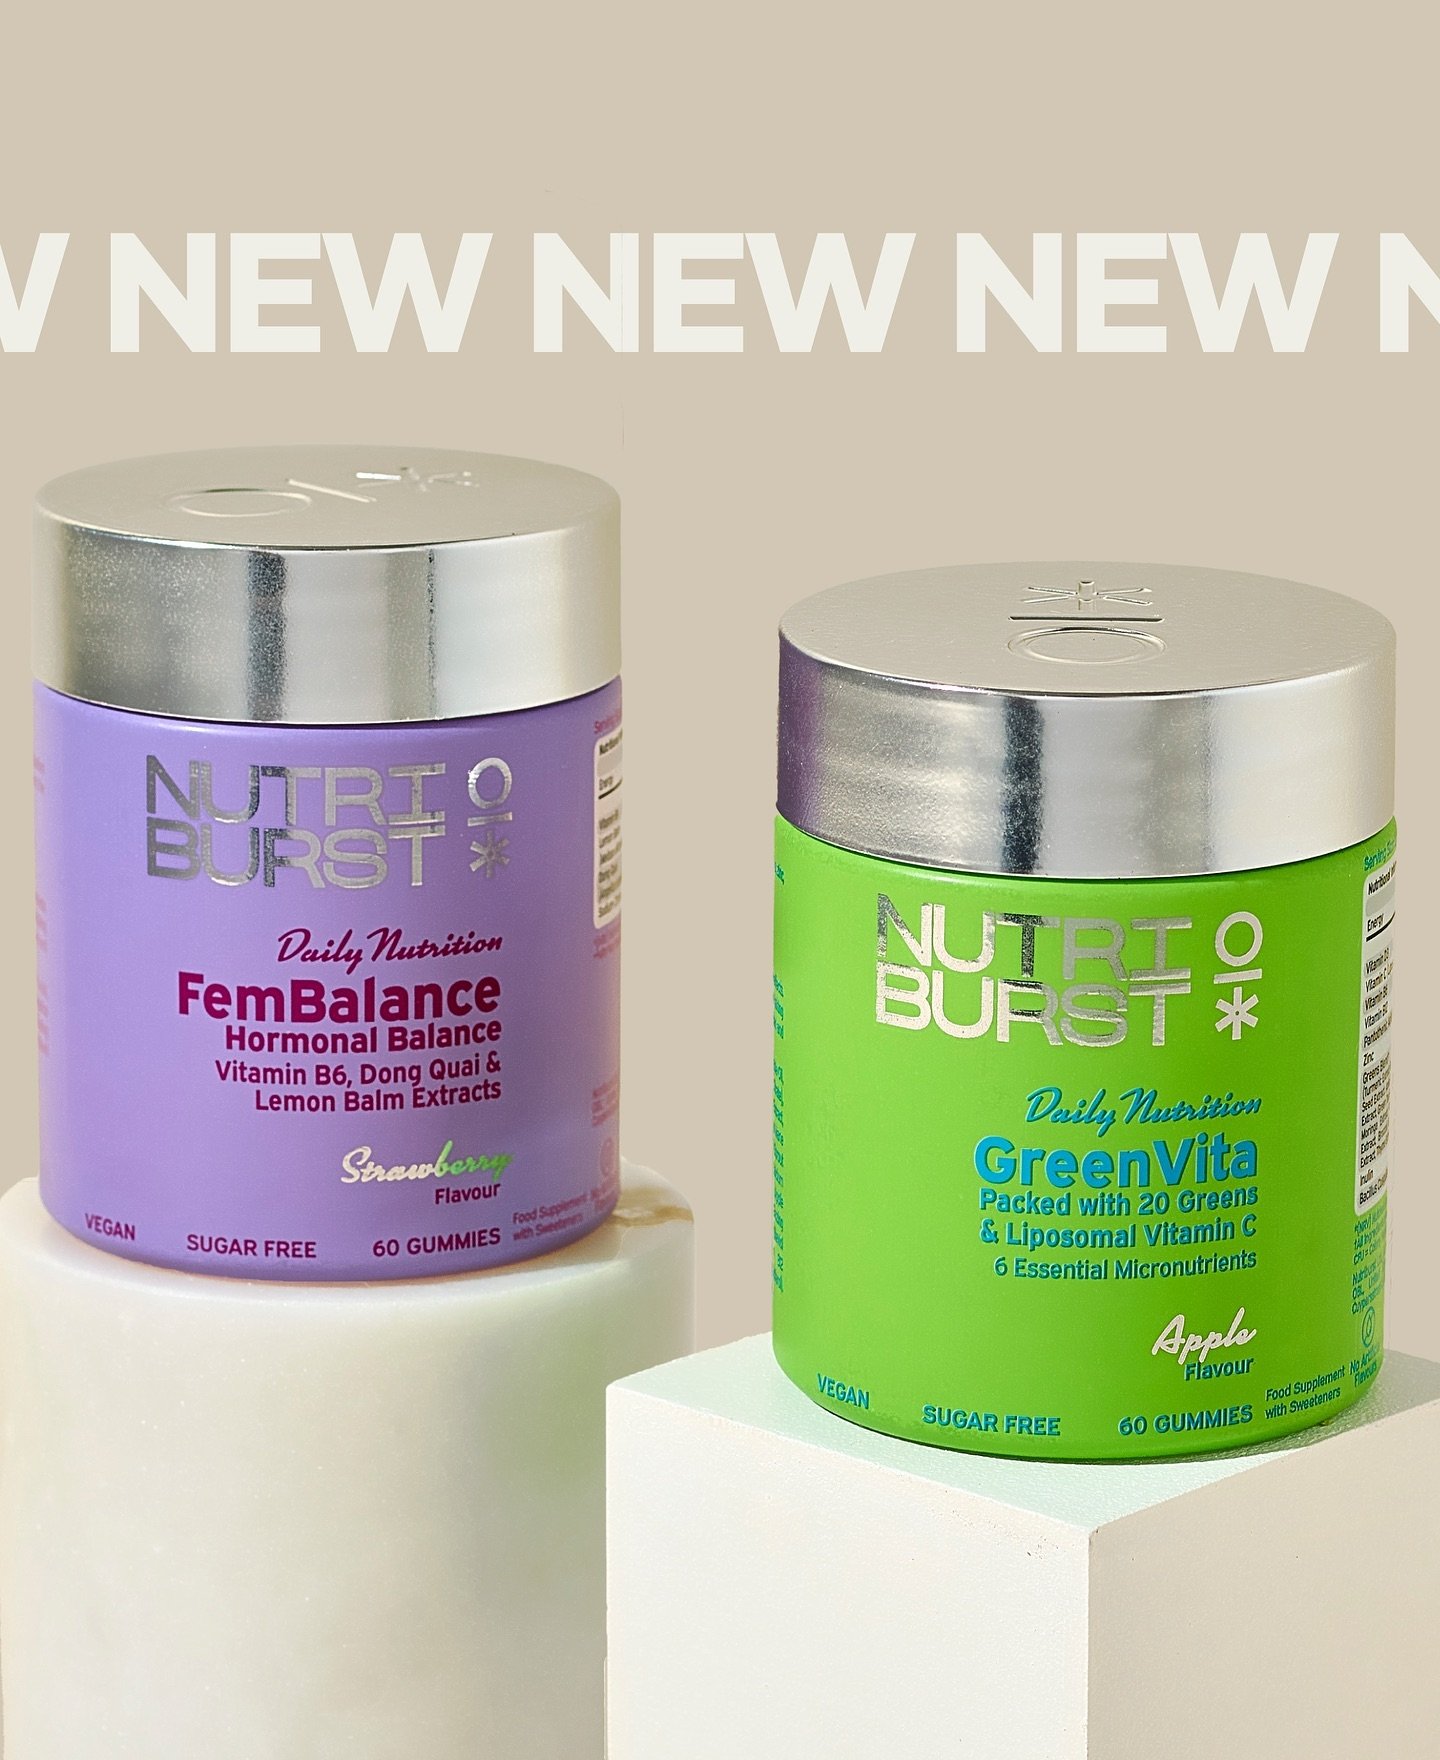 0% Sugar, 100%full of flavour and 100% proven results 💥

Let us introduce you to our two new Nutriburst team members! FemBalance which supports hormonal balance and GreenVita which is packed with 20 greens💚 

We have a range of vitamin gummies to h